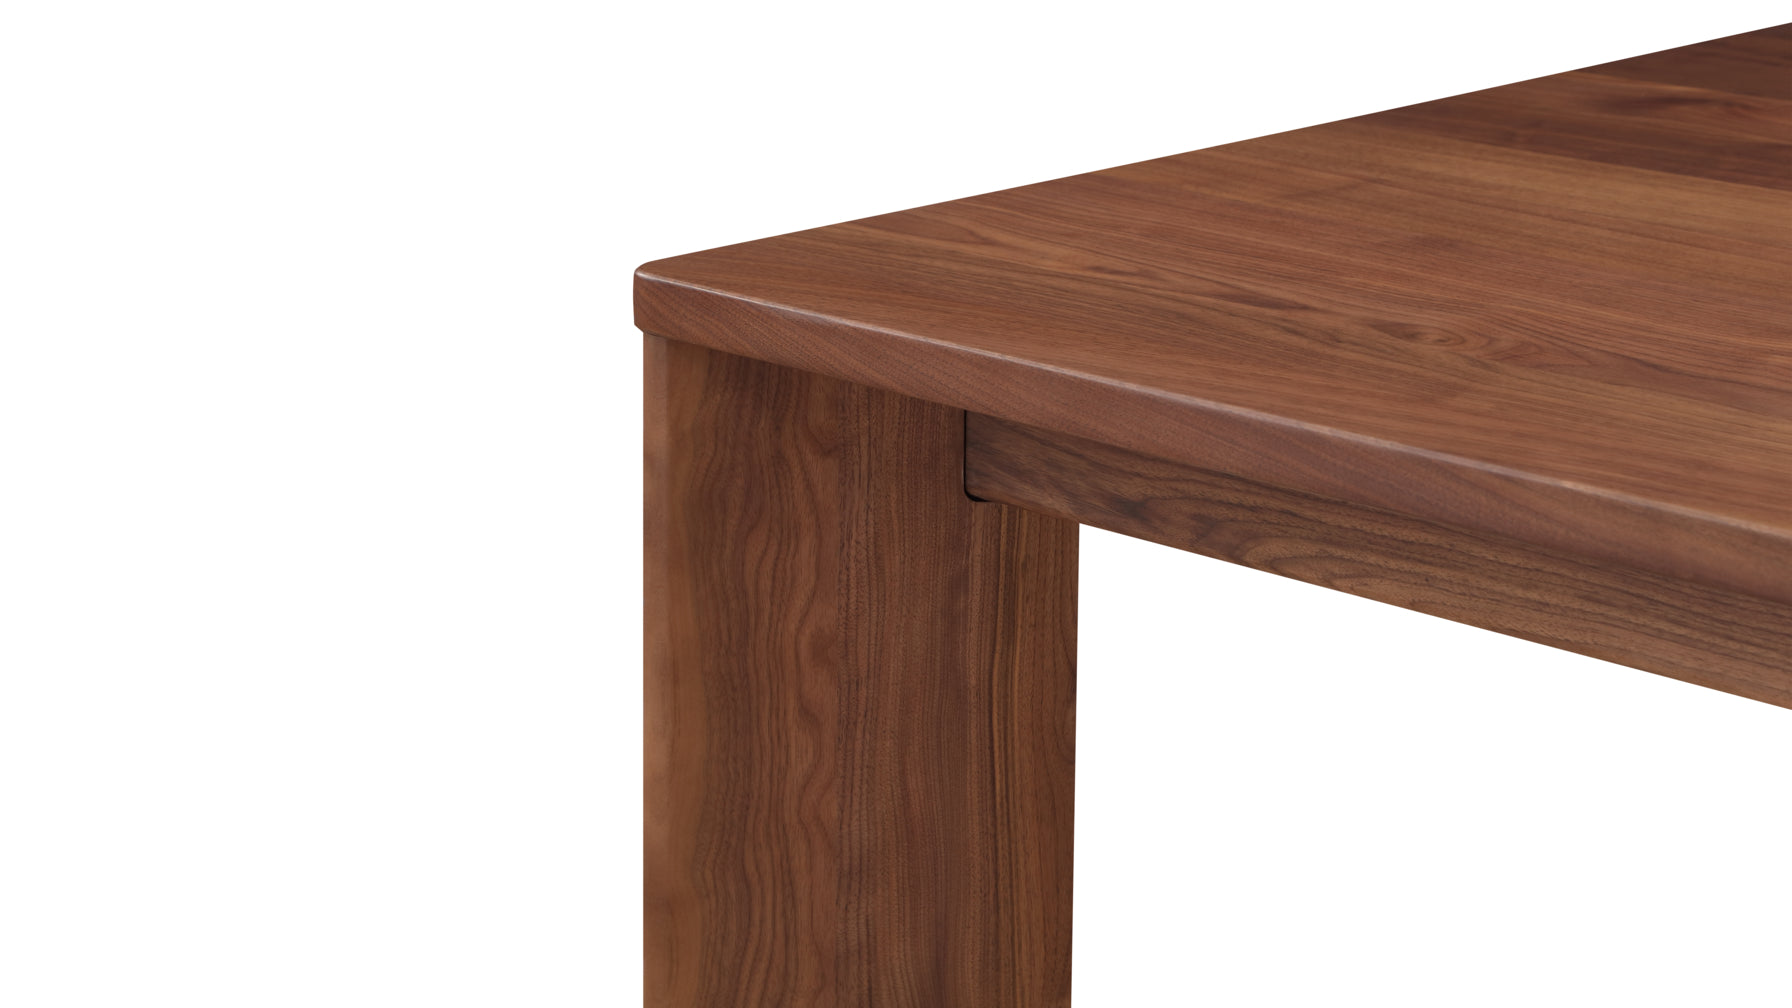 Frame Dining Table, Seats 6-8 People, Walnut - Image 4